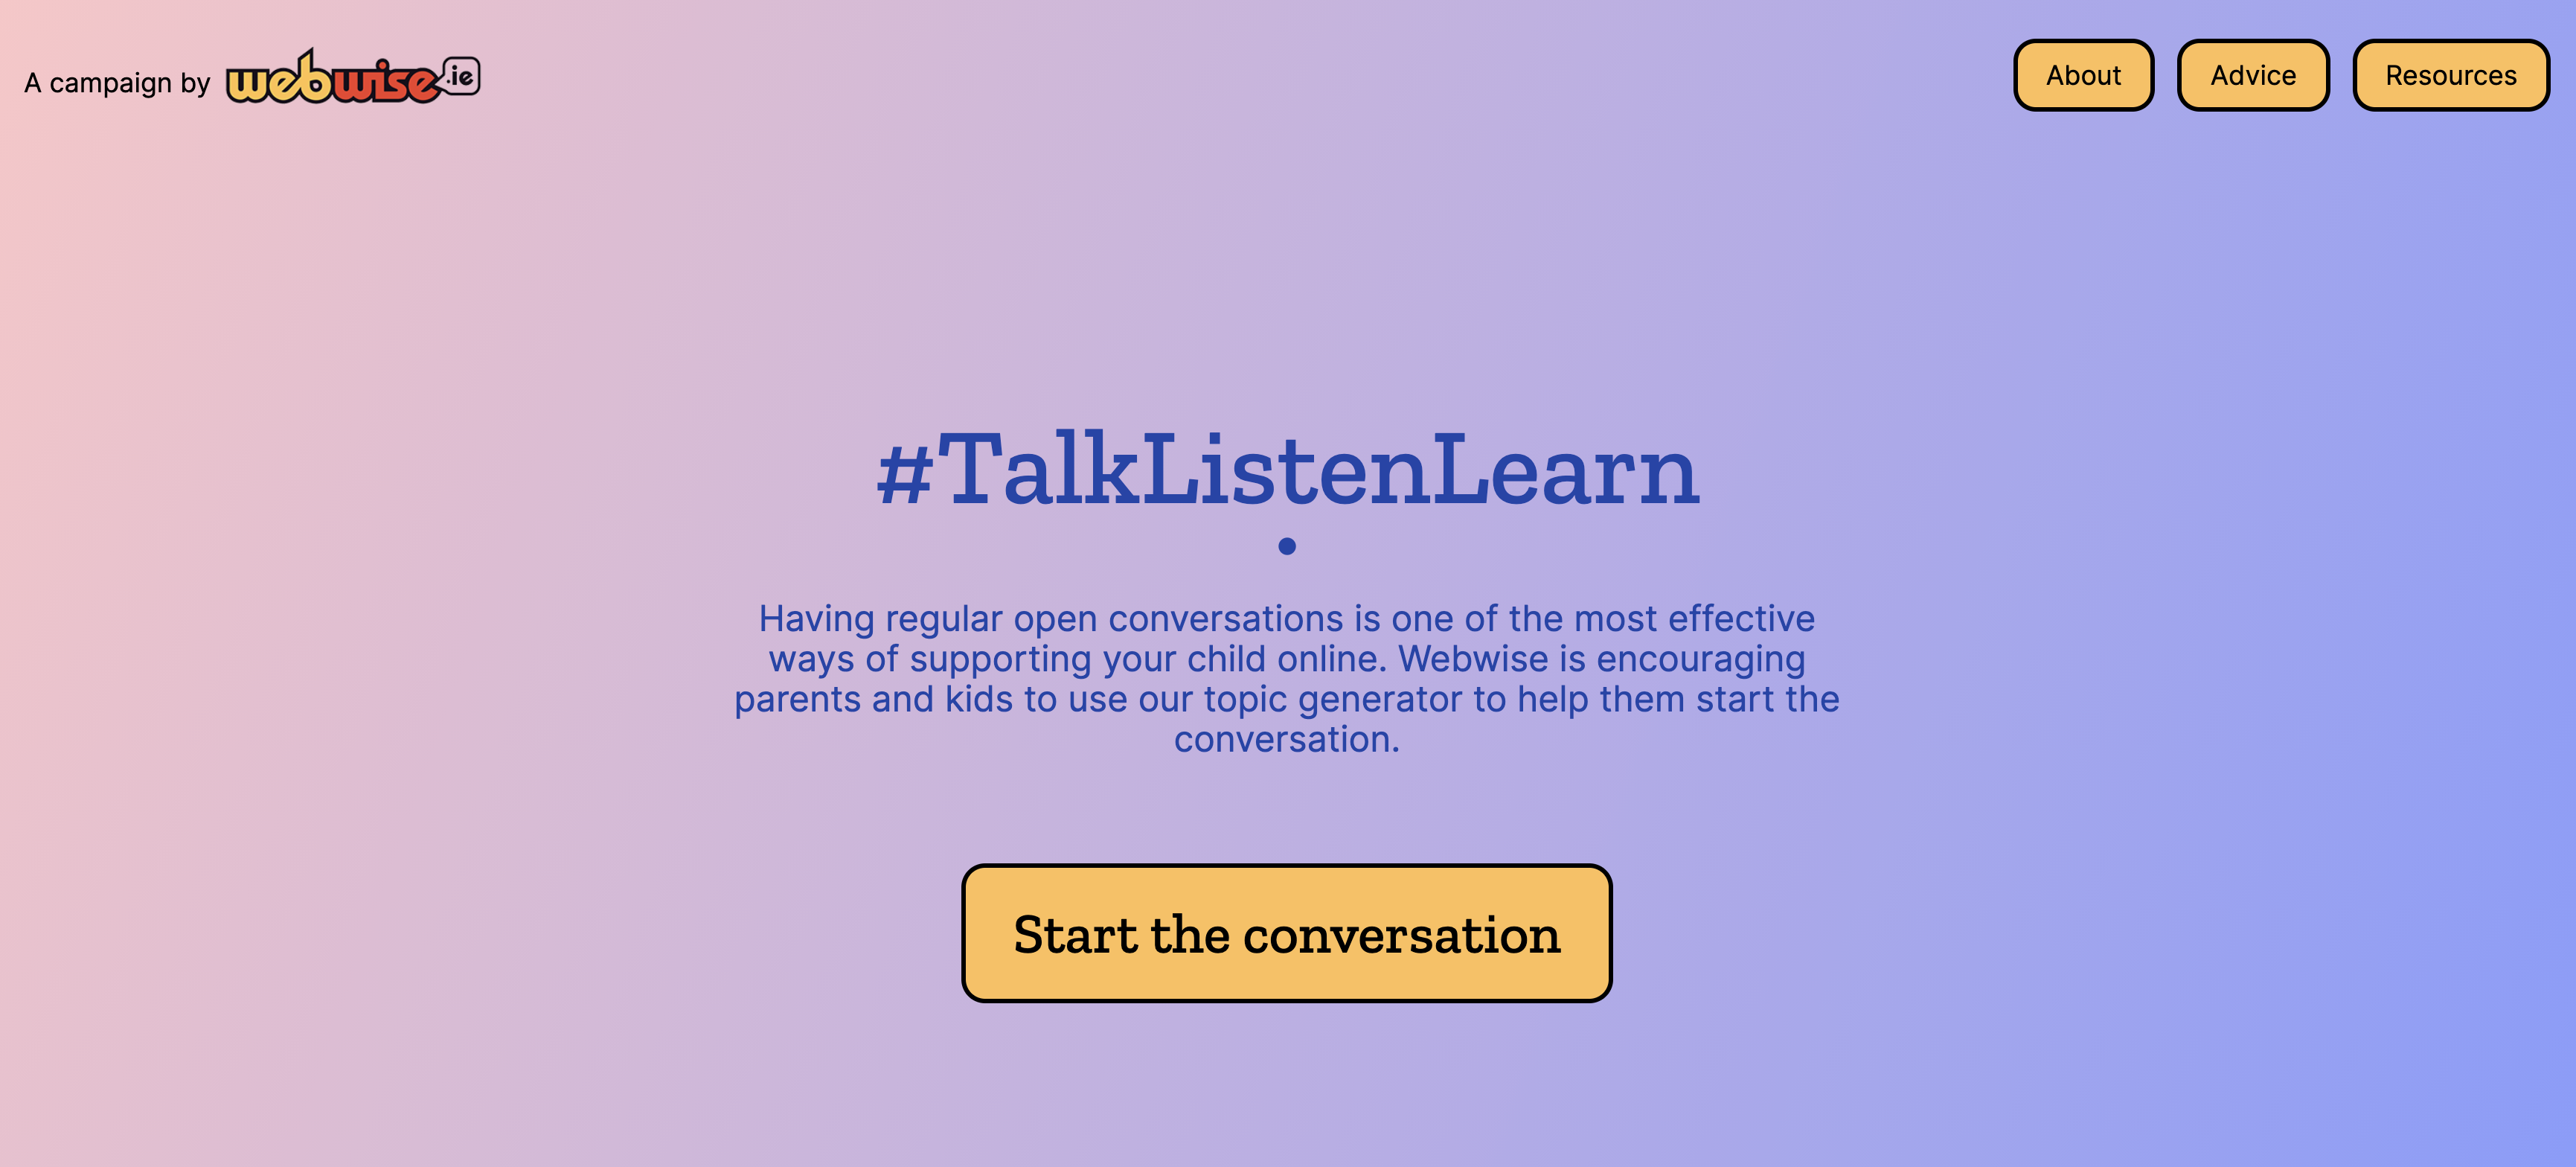 Supporting Families Online: #TalkListenLearn